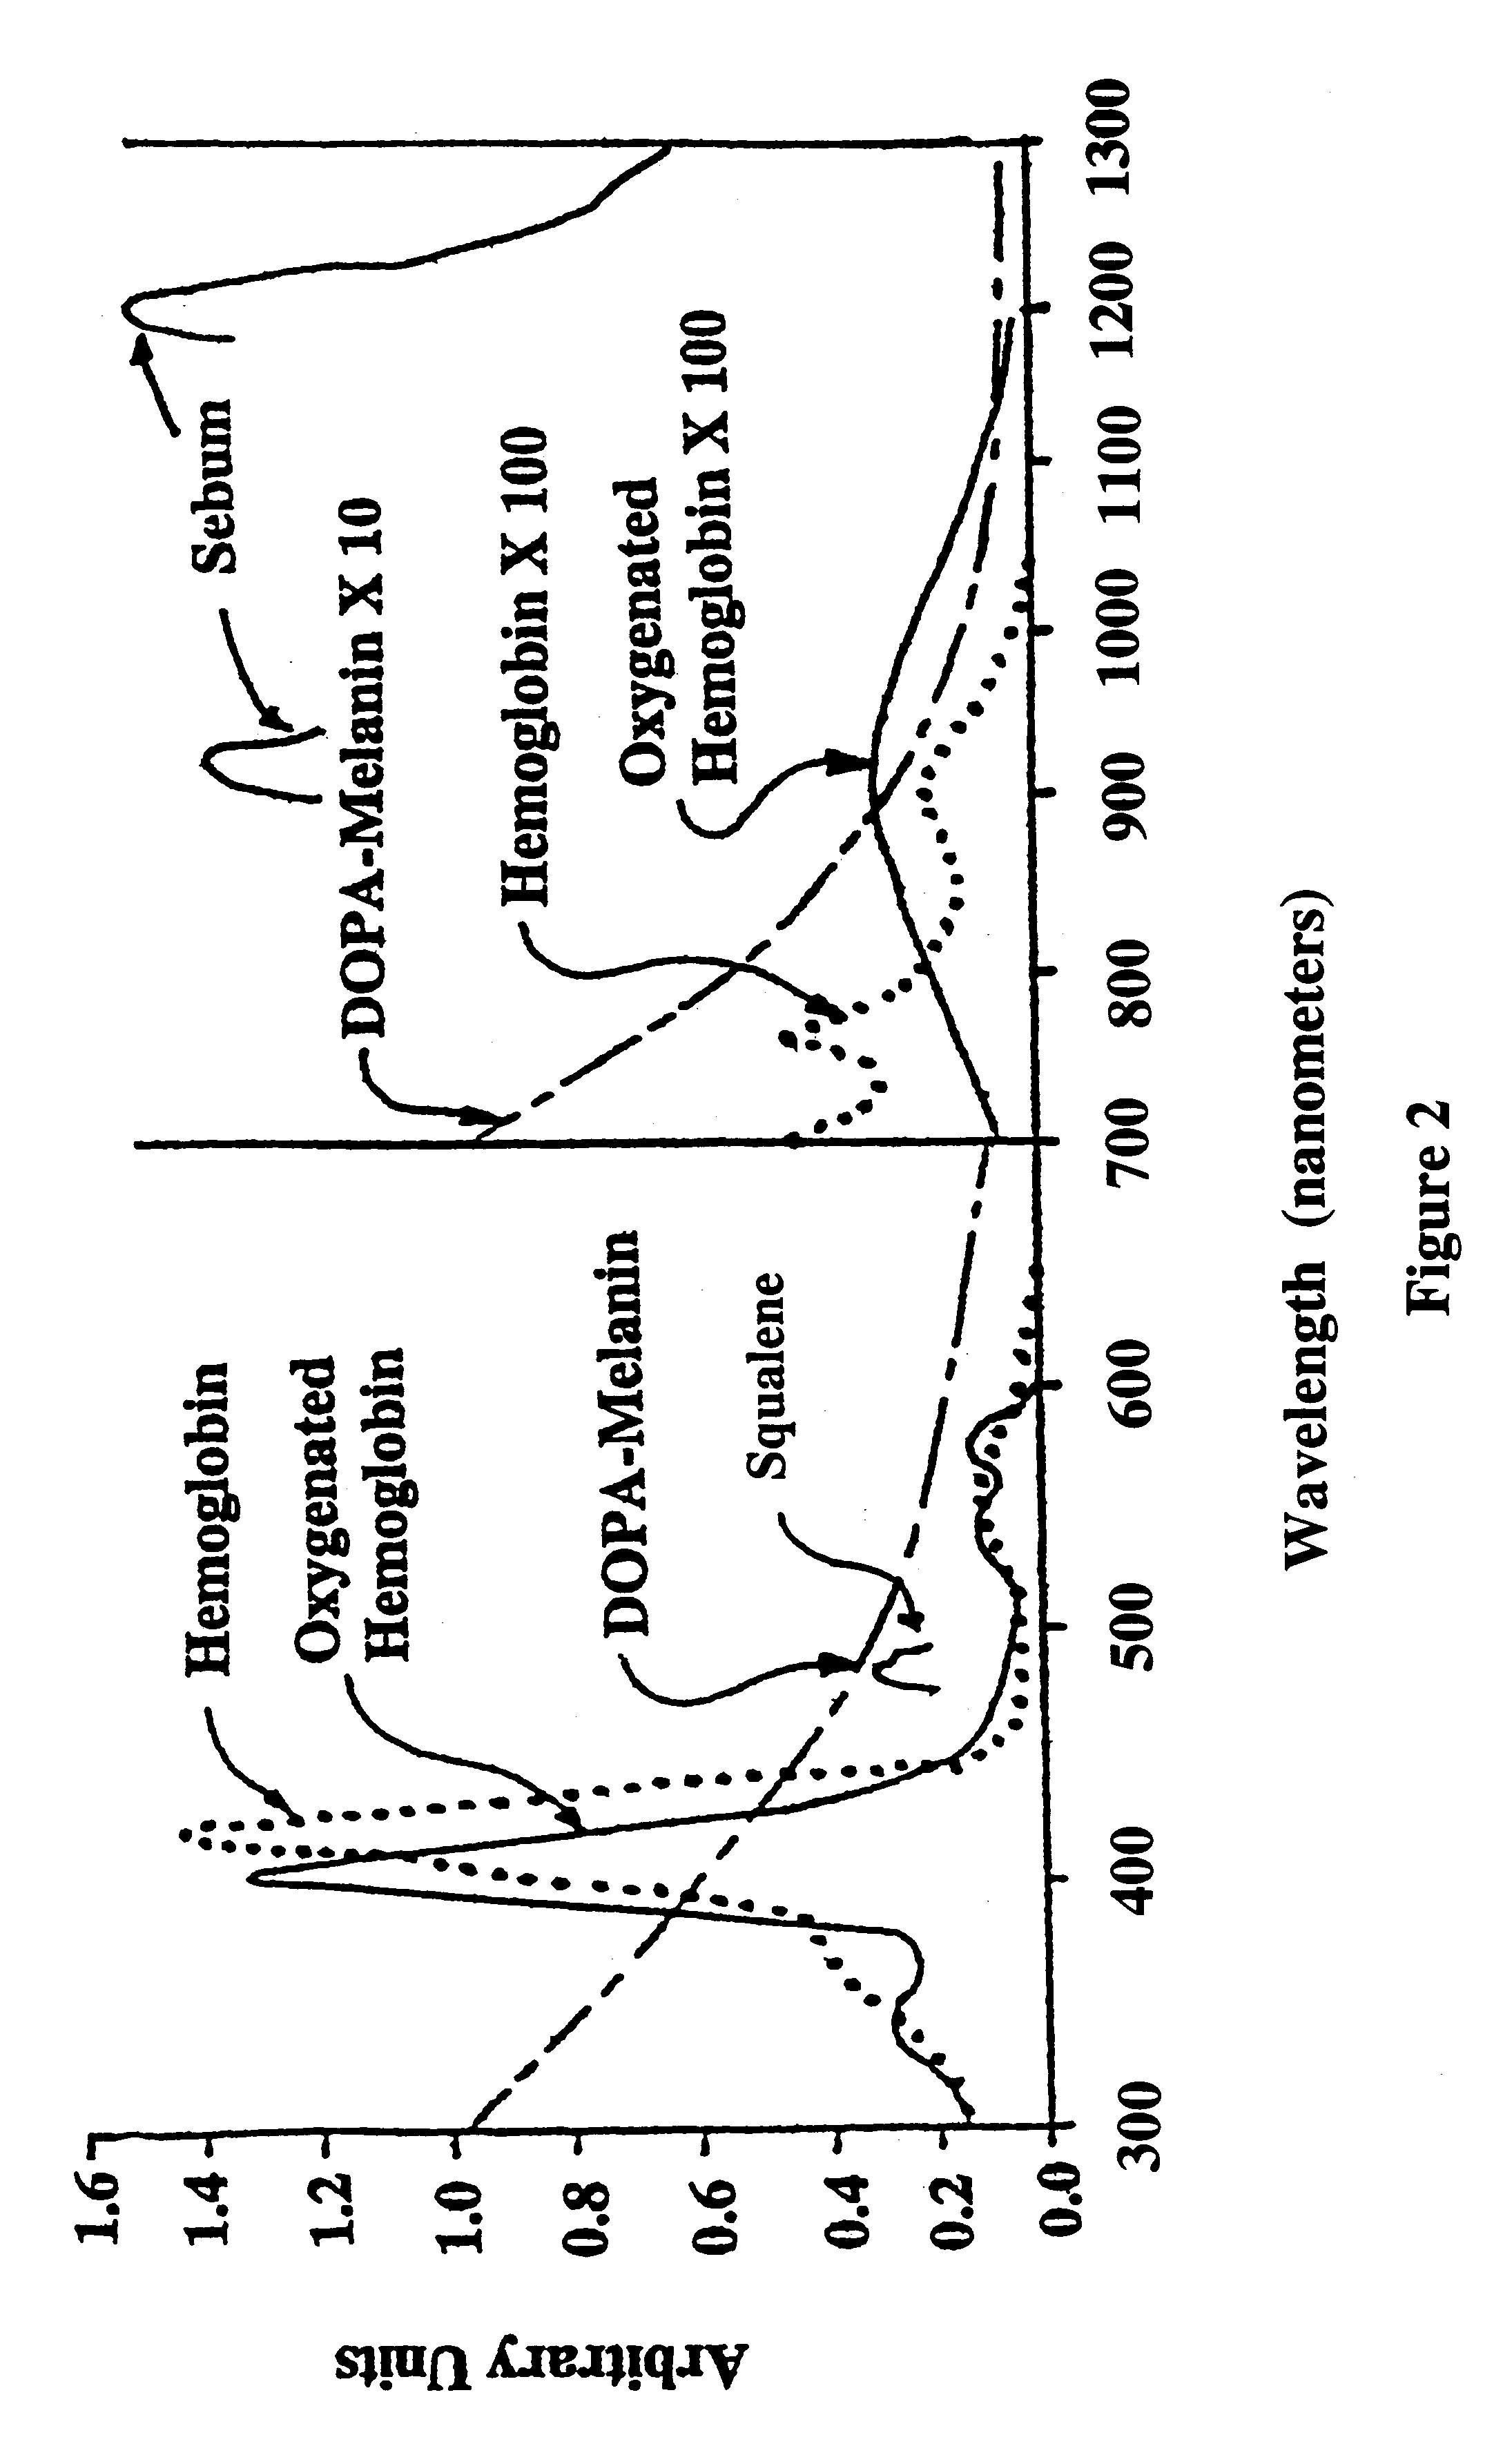 Method of reducing sebum production by application of pulsed light